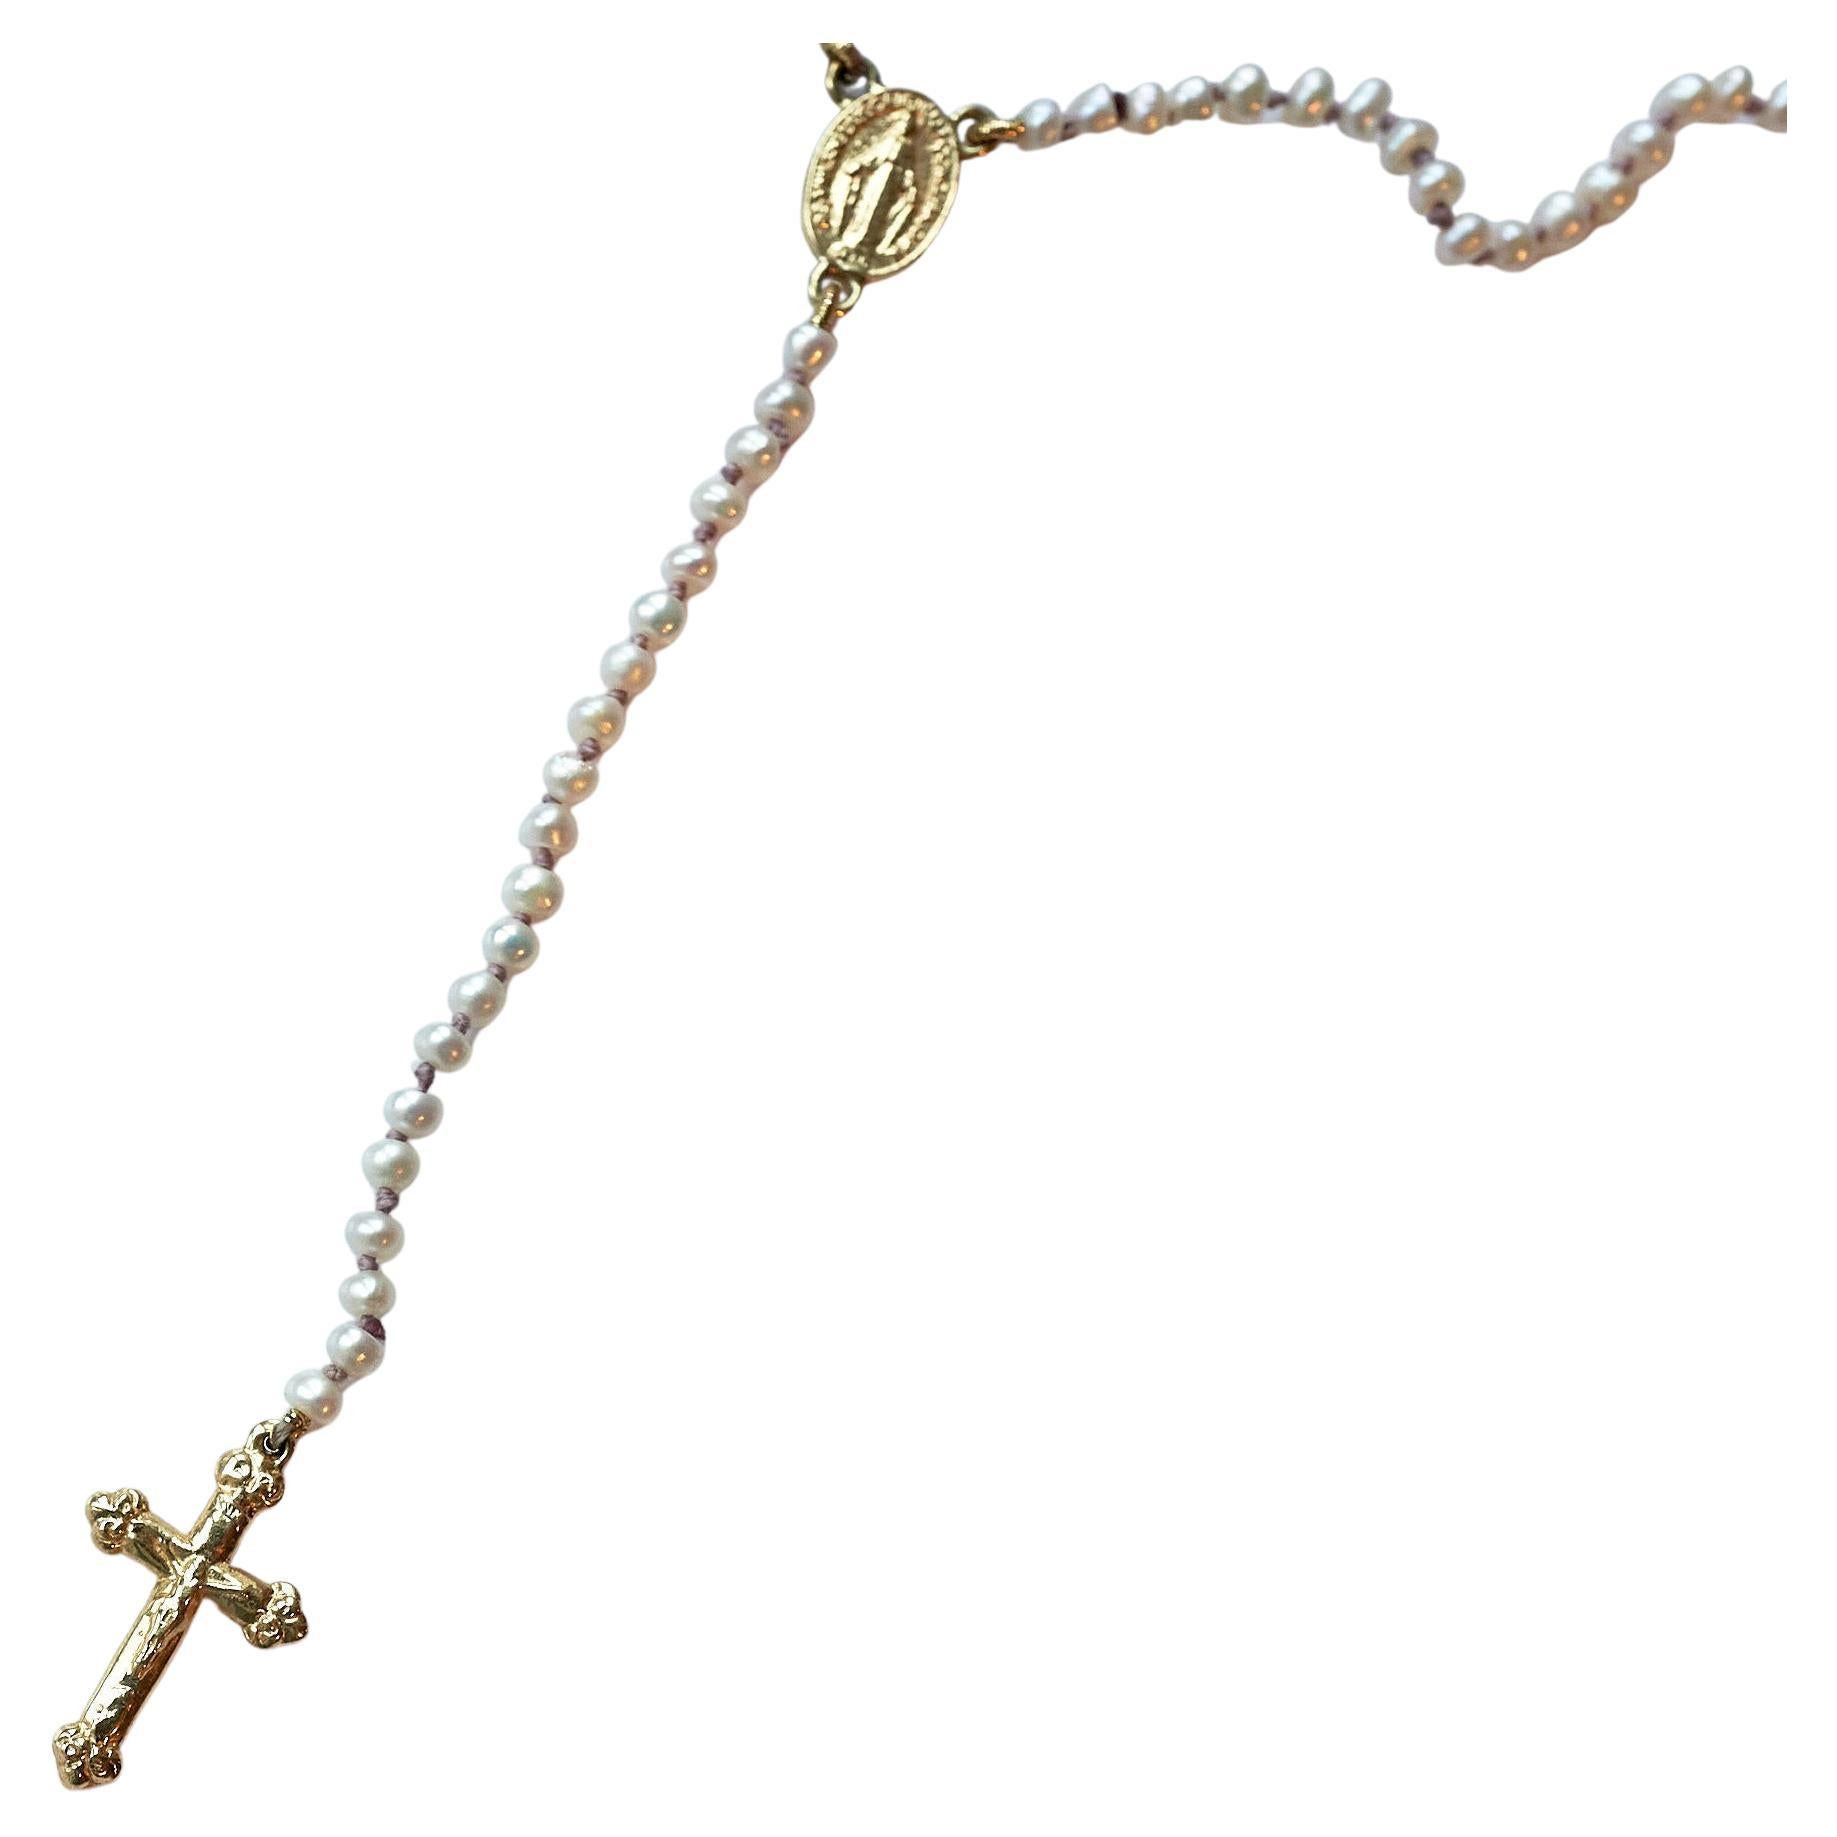 Rosario White Pearl Crucifix Cross Virgin Mary 14k Gold Religious Necklace

Symbols or medals can become a powerful tool in our arsenal for the spiritual. 
Since ancient times spiritual pendants, religious medals has been used to protect us. During